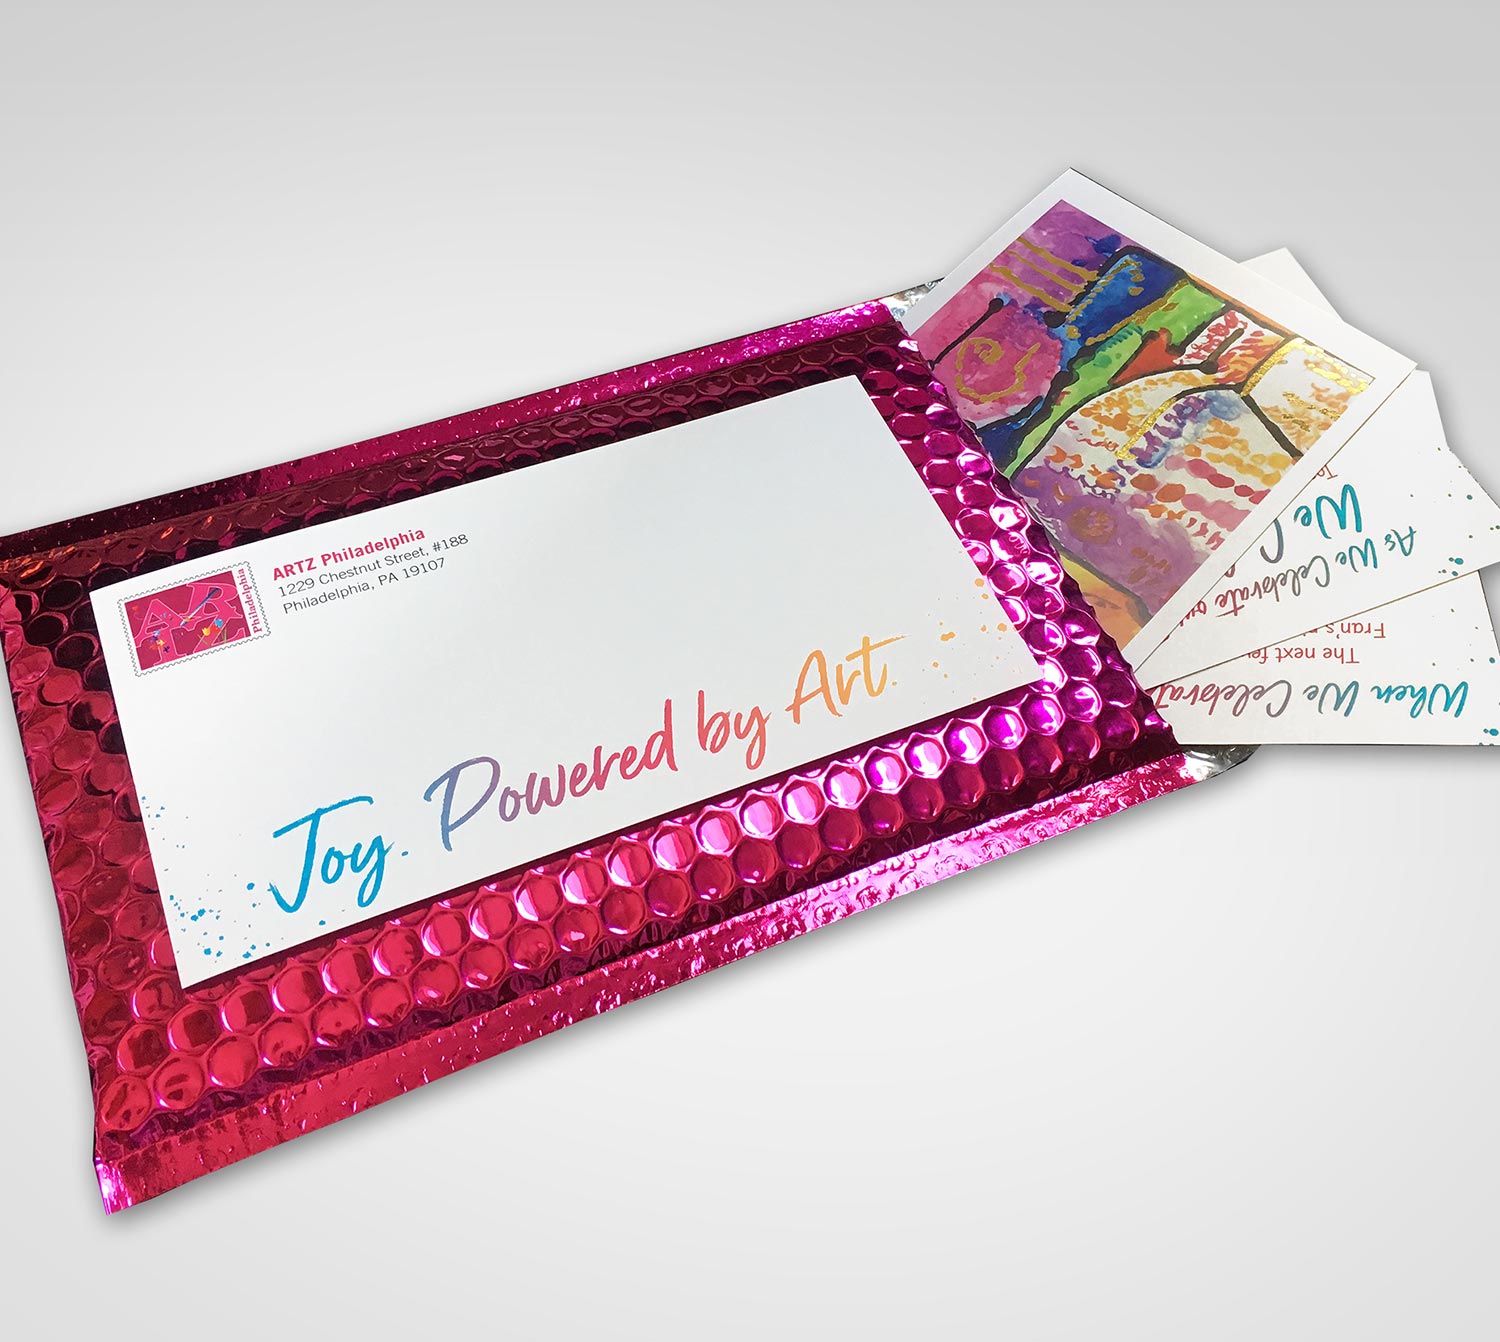 promotional materials design - shiny pink postcards and packaging created by graphic designer